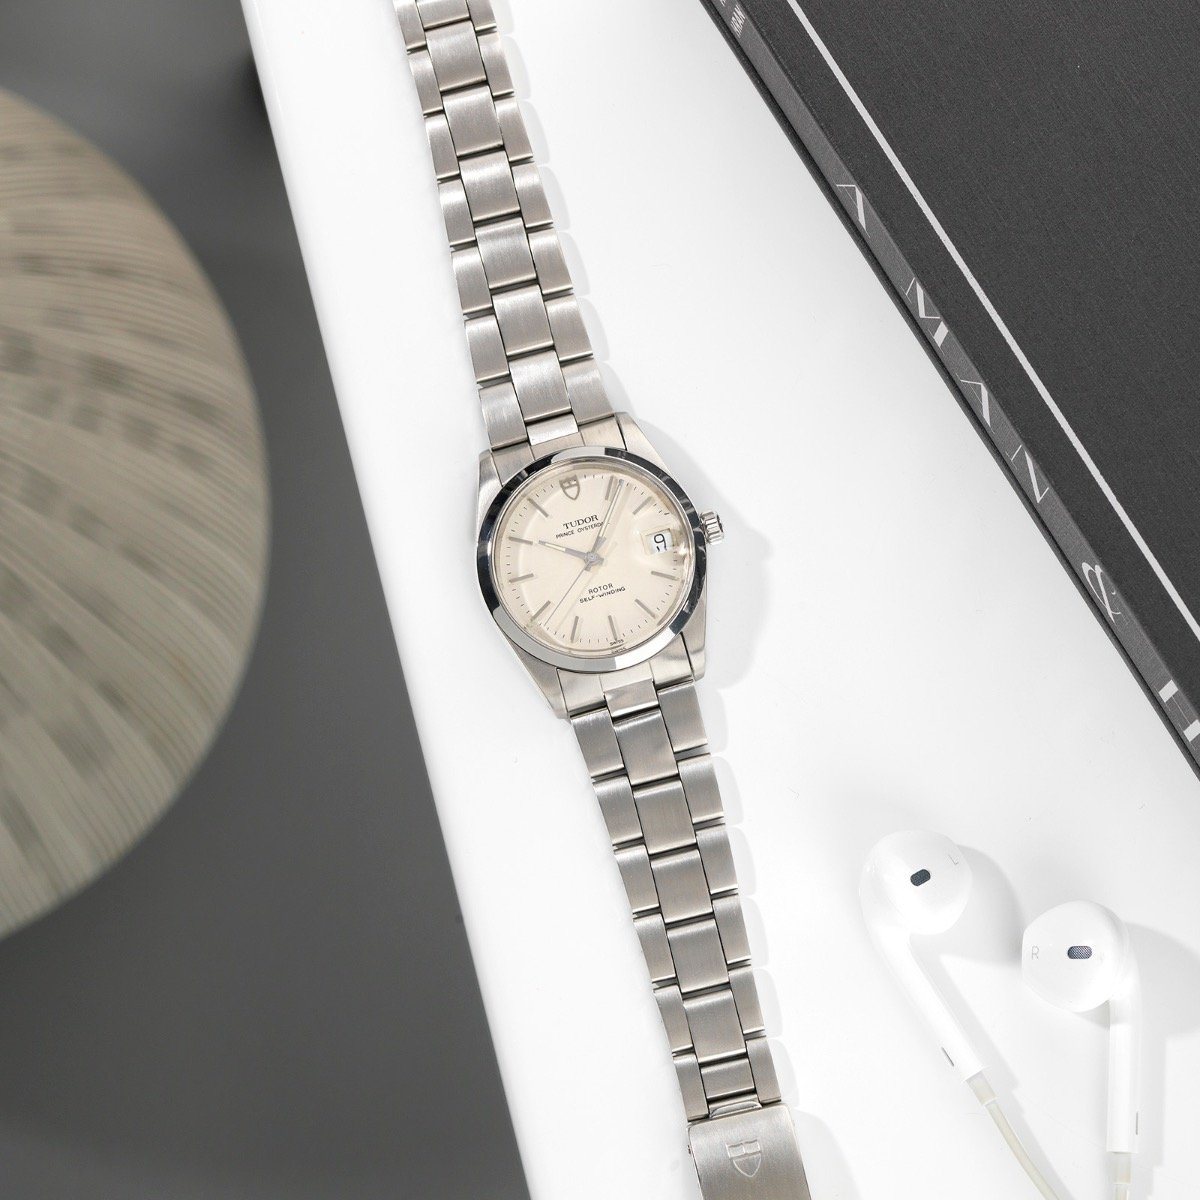 Tudor Oysterdate Off-white Linen Dial Reference 74000n